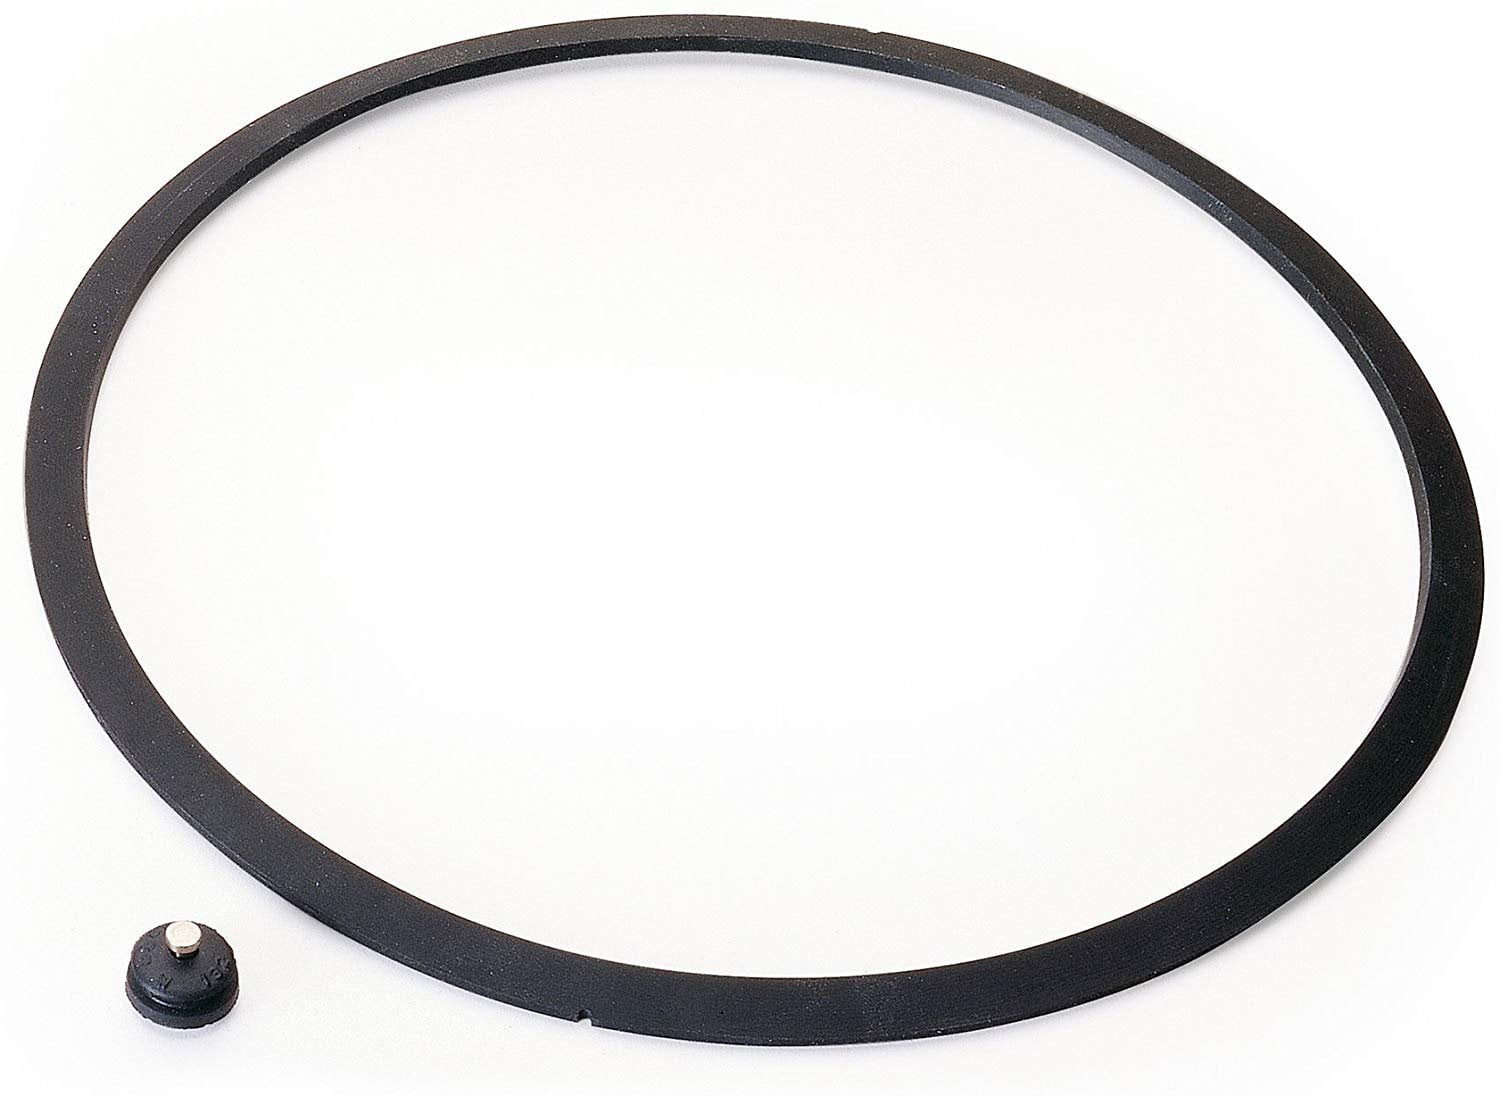 Presto 09901 Pressure Cooker Sealing Ring and Automatic Air Vent